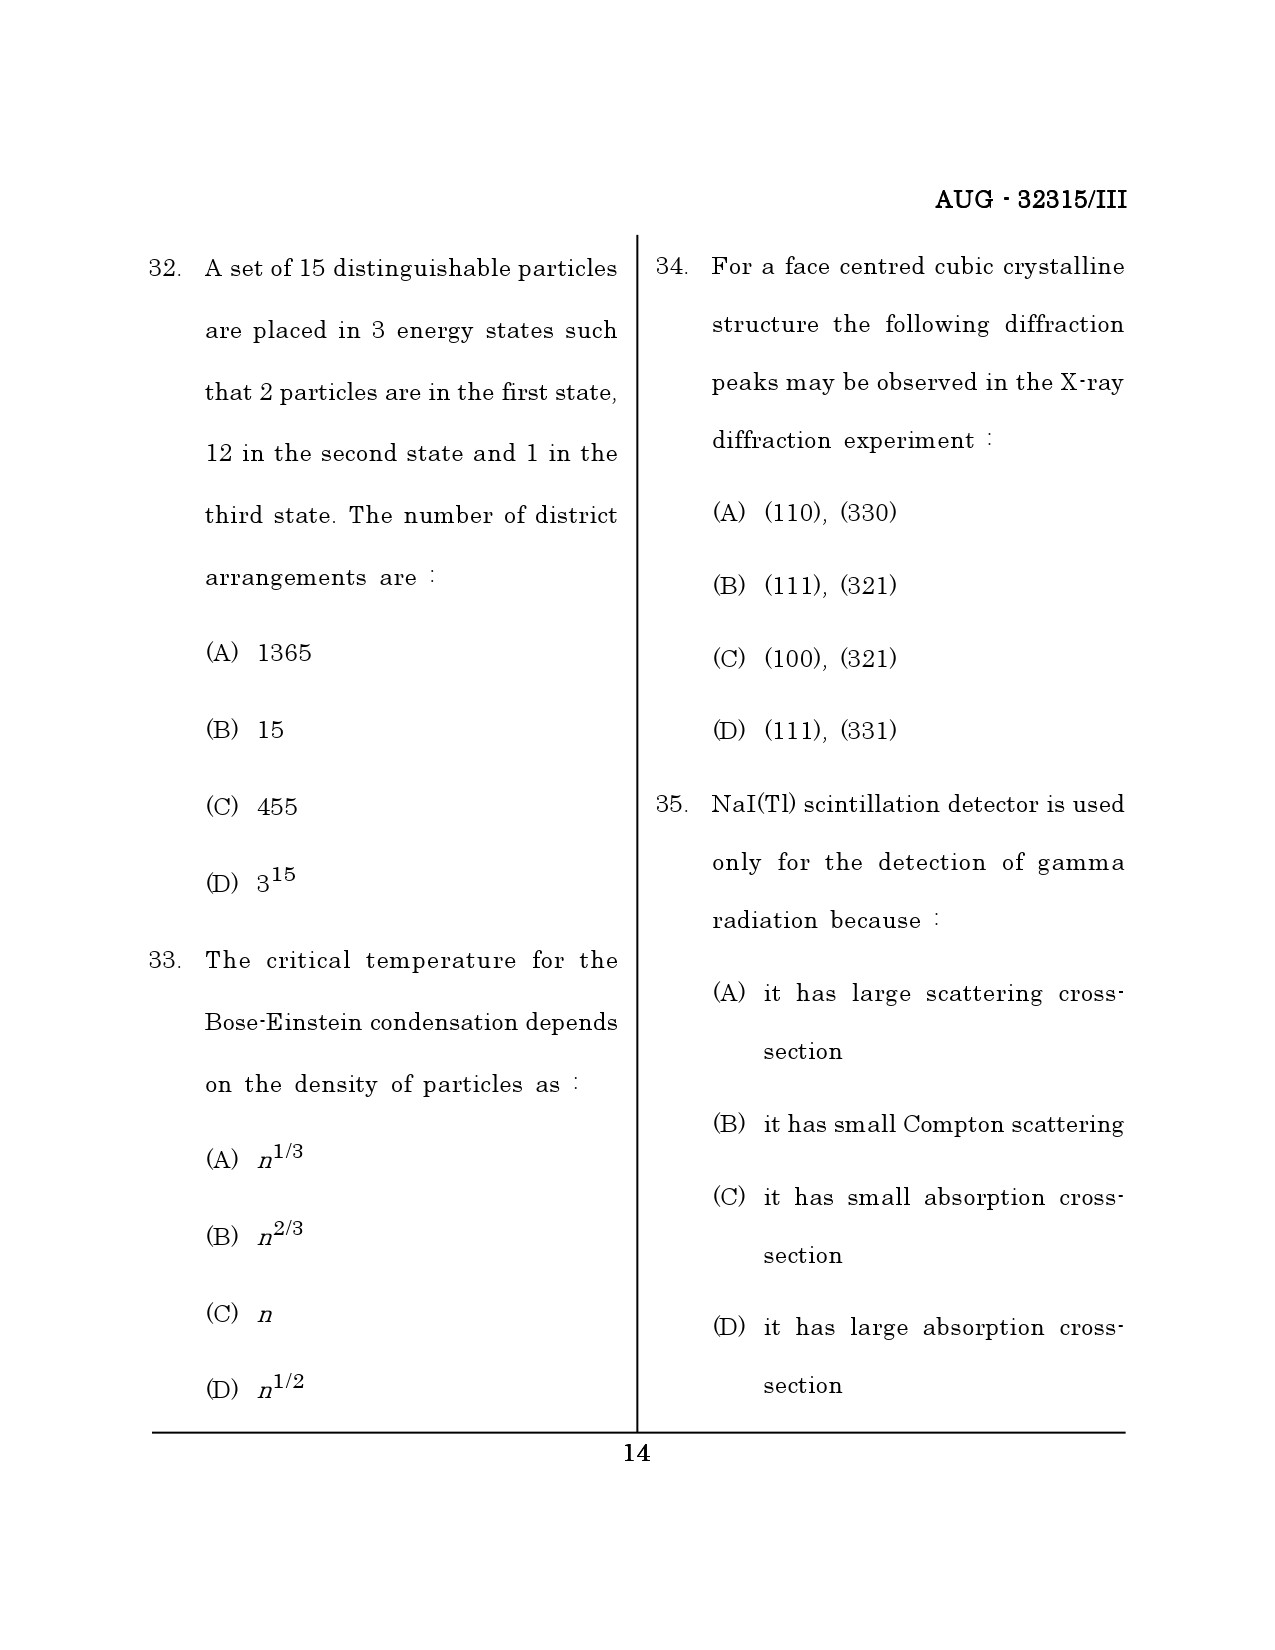 Maharashtra SET Physical Science Question Paper III August 2015 13